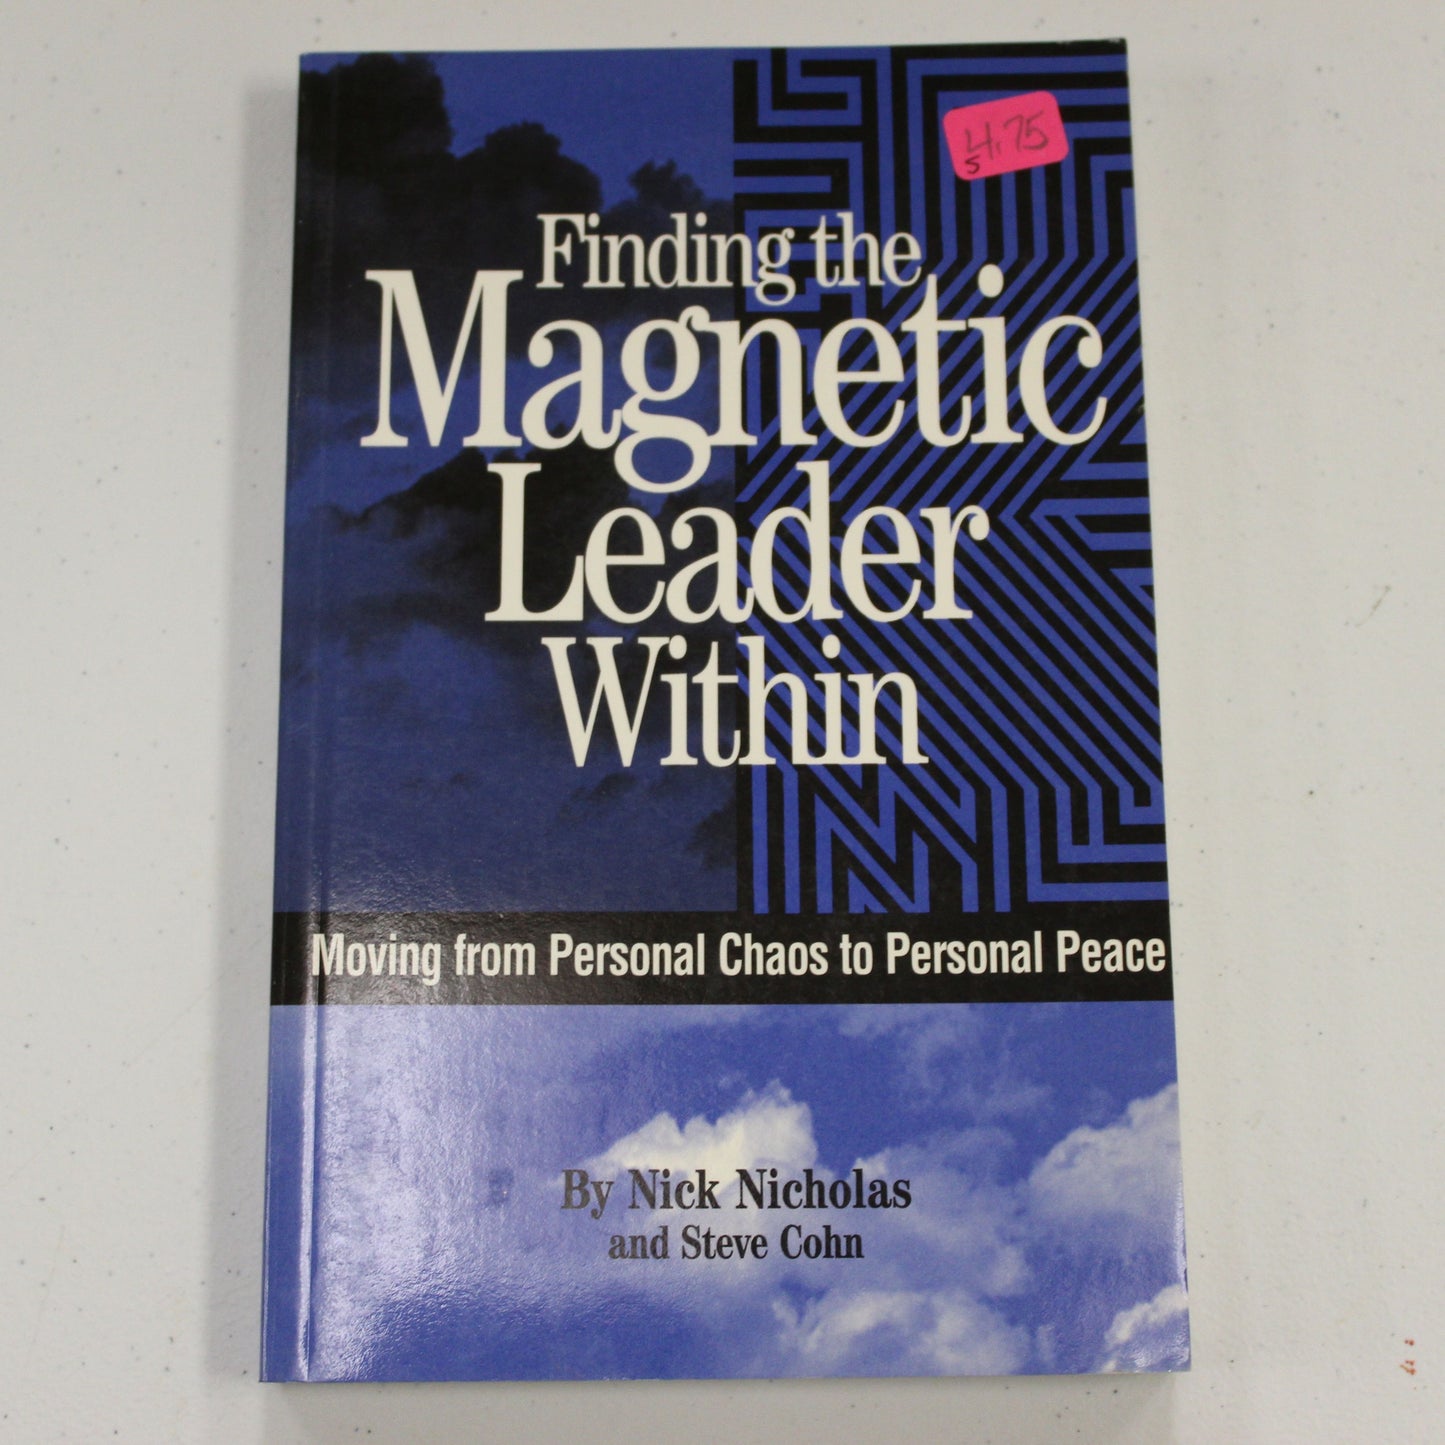 FINDING THE MAGNETIC LEADER WITHIN